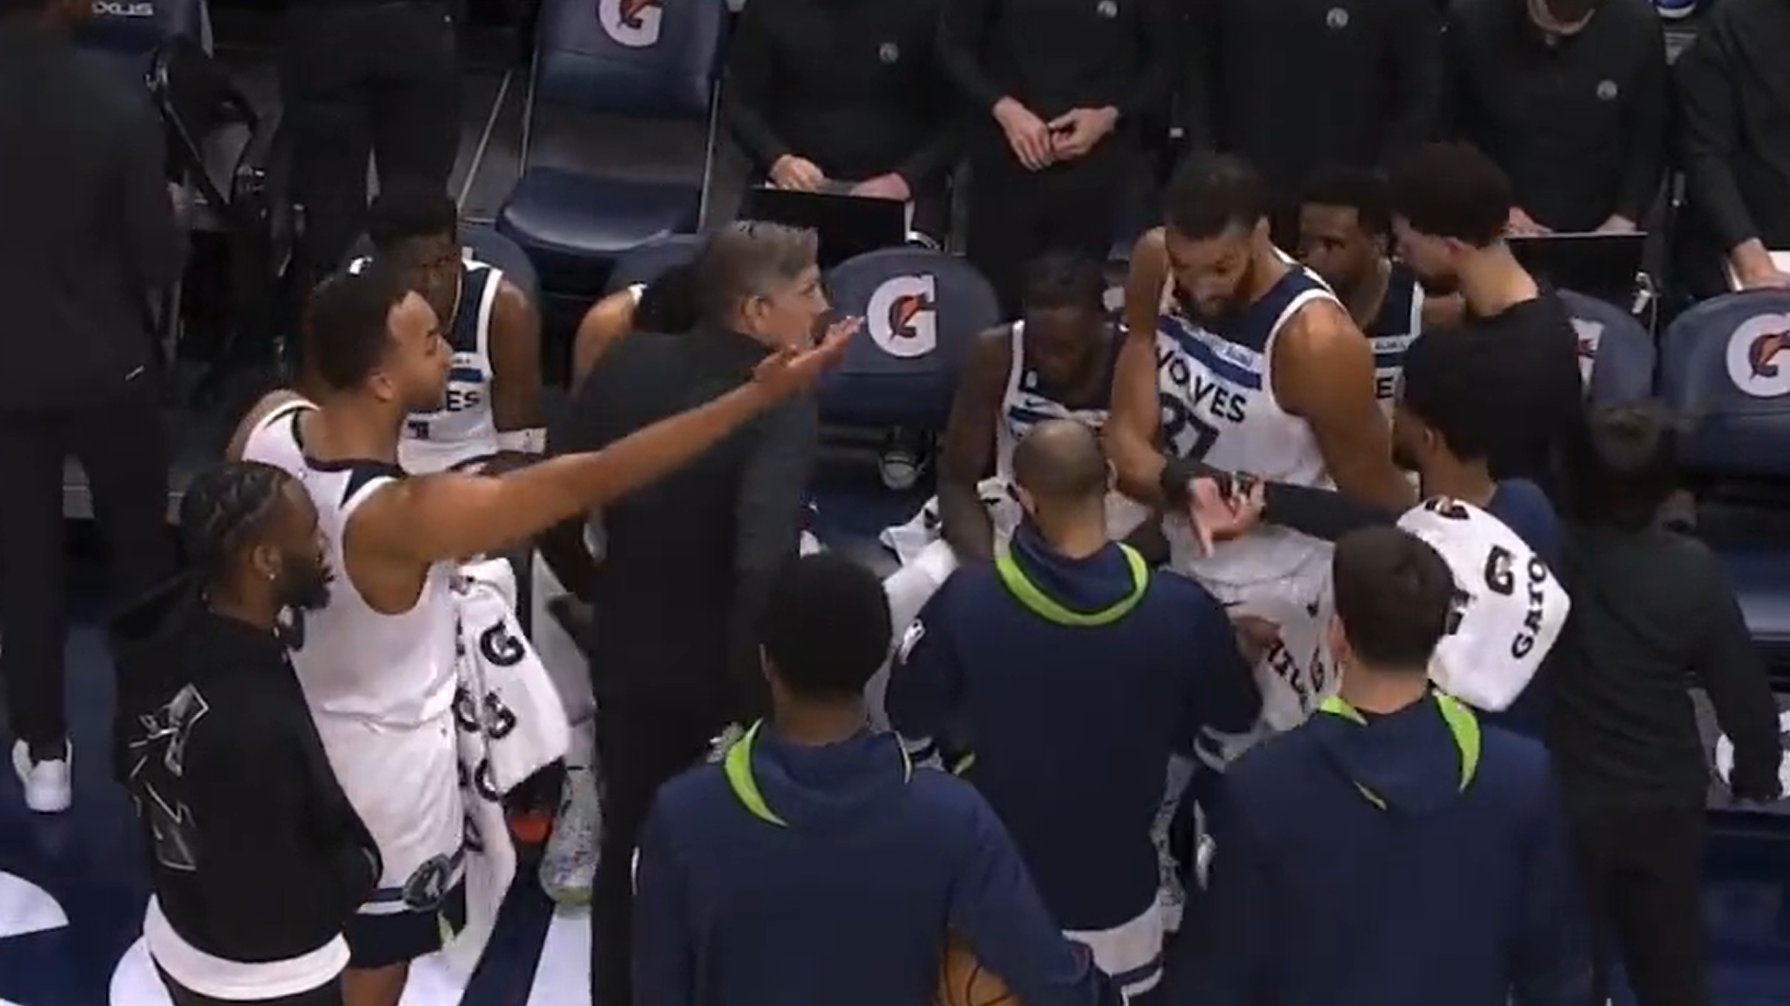 WATCH: Timberwolves' Rudy Gobert Punches Teammate Kyle Anderson, Sent Home by Team